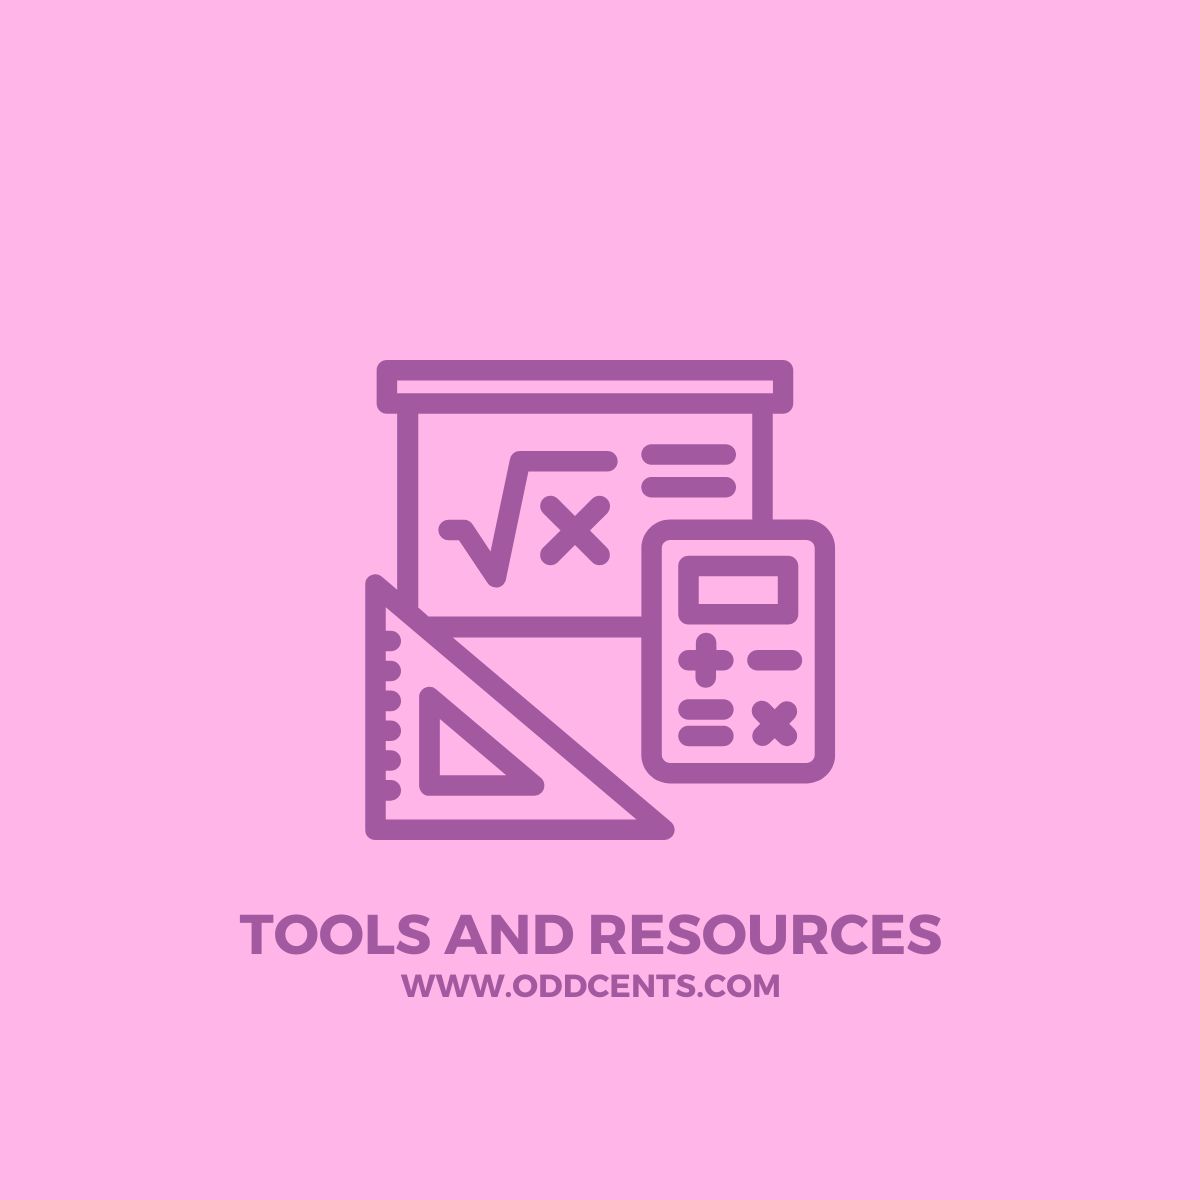 Odd Cents - Tools and Resources